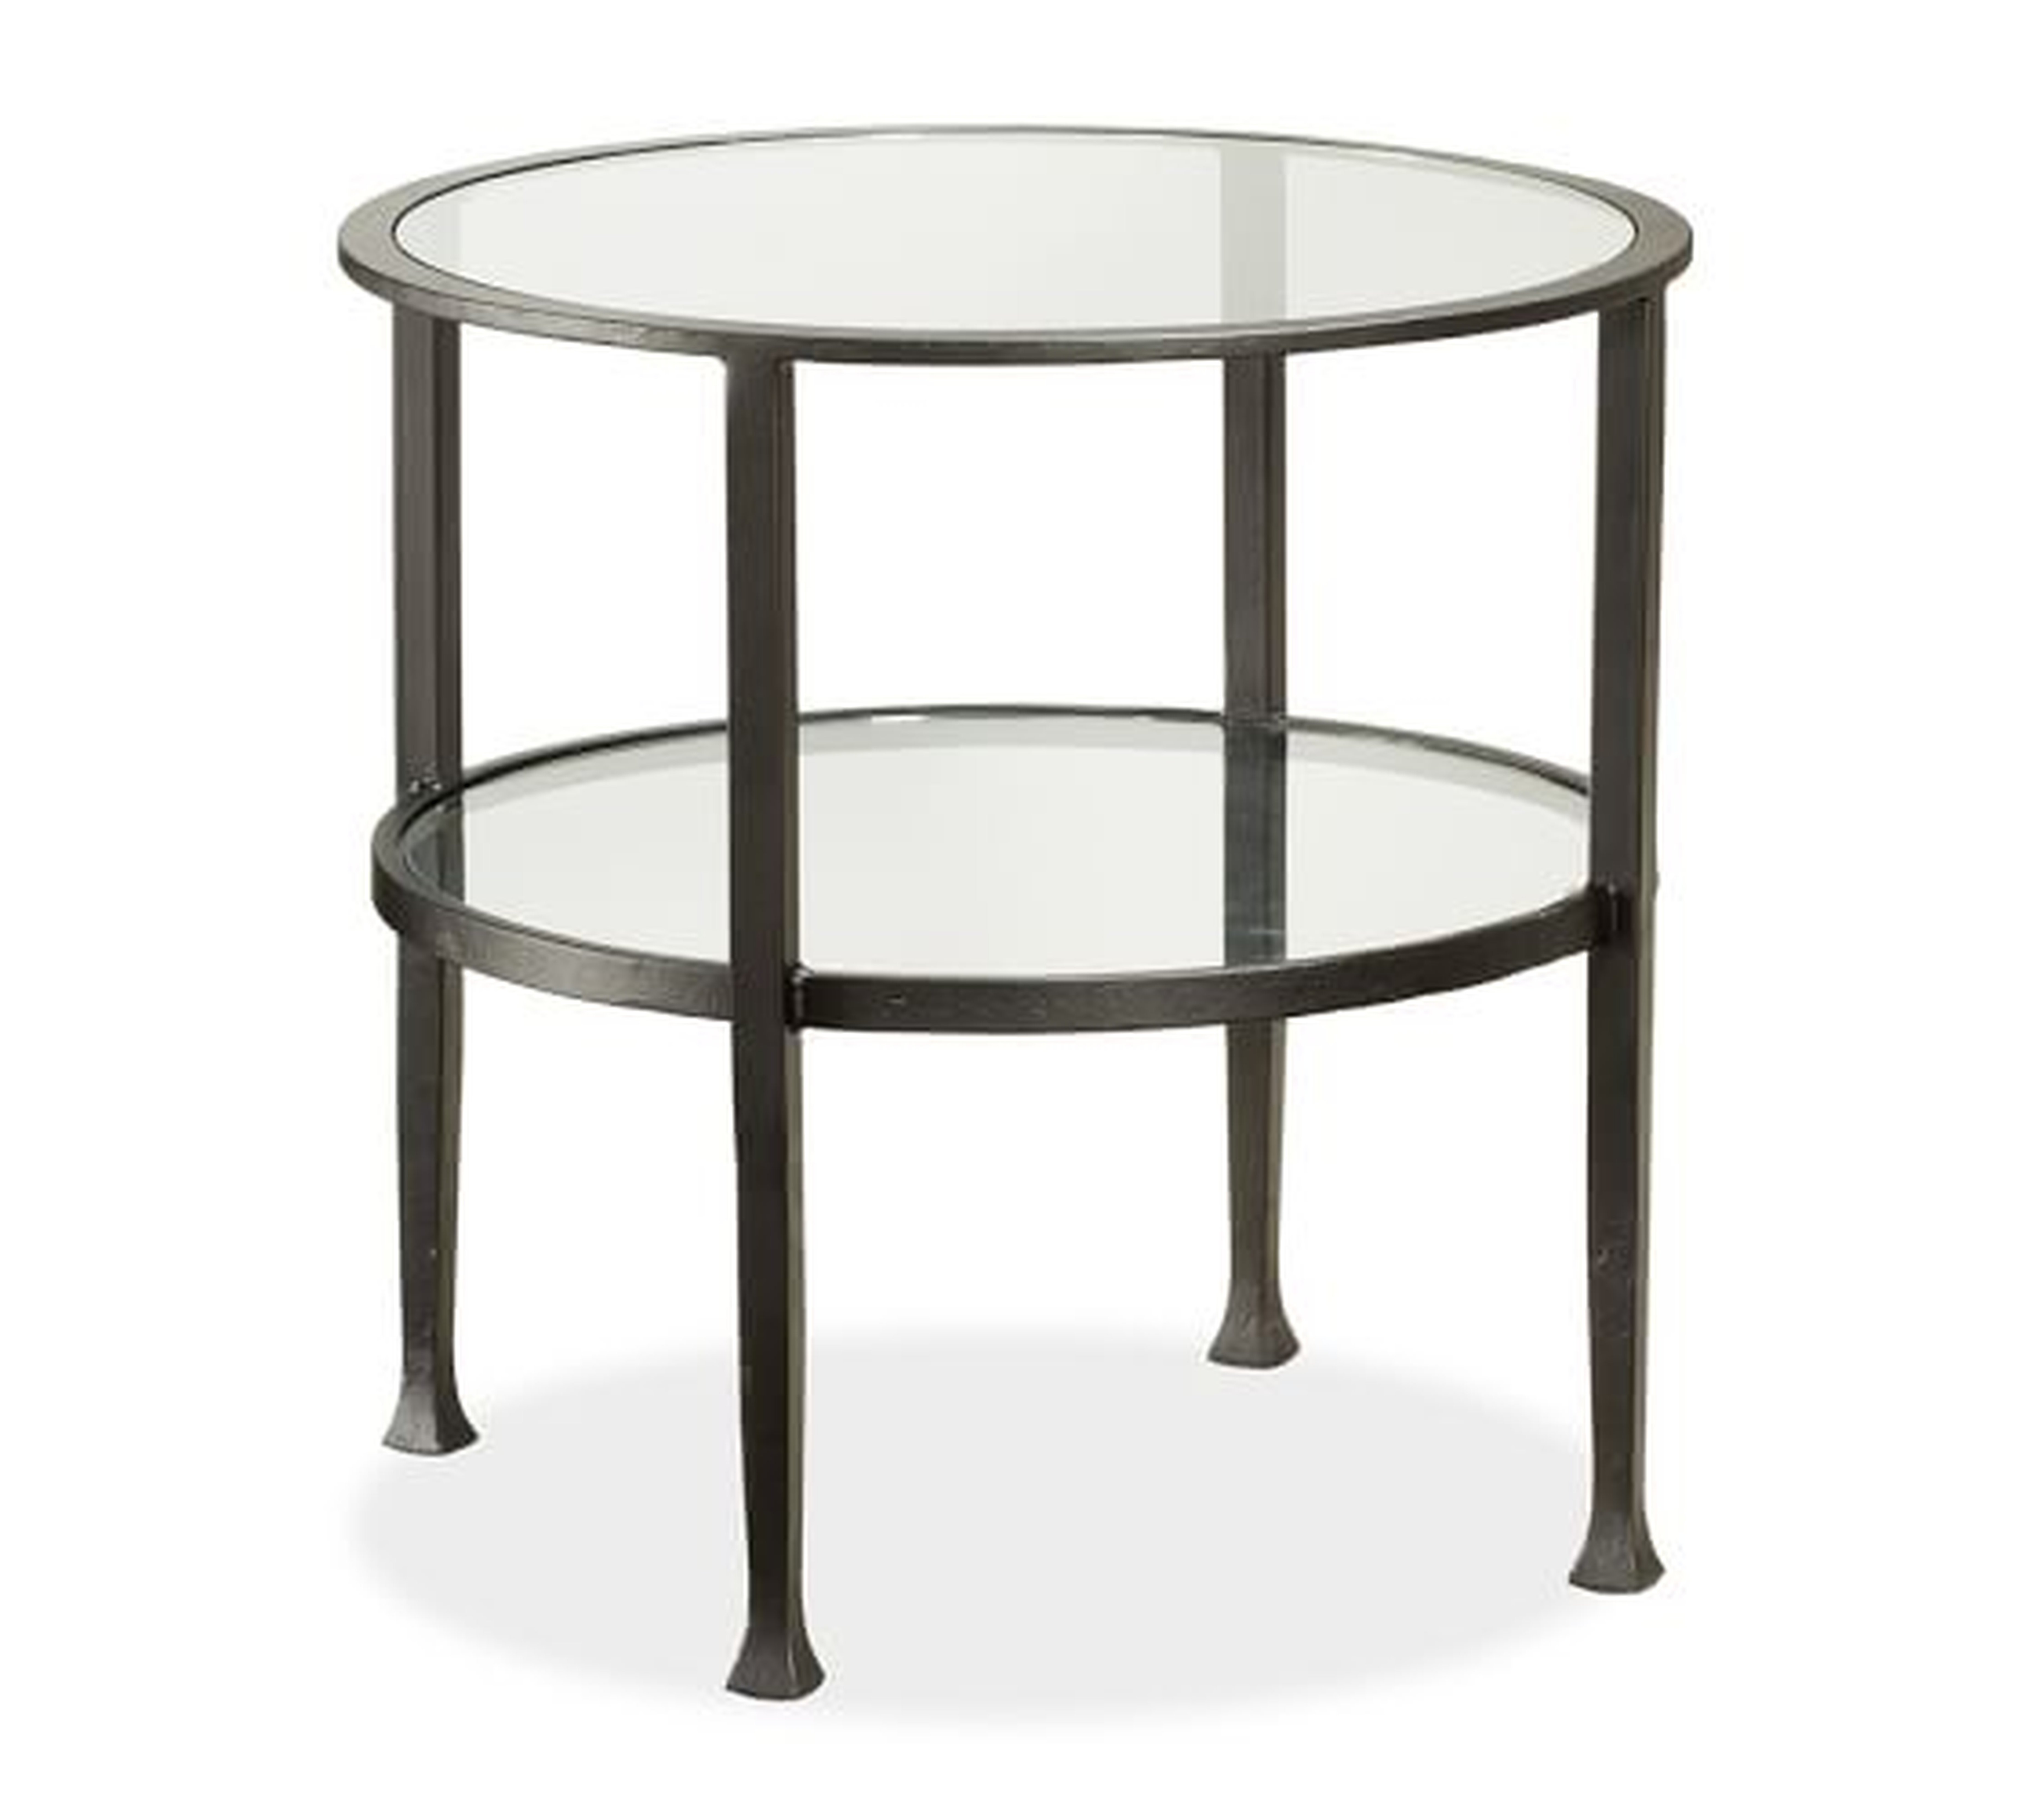 TANNER ROUND SIDE TABLE - BRONZE FINISH - Pottery Barn